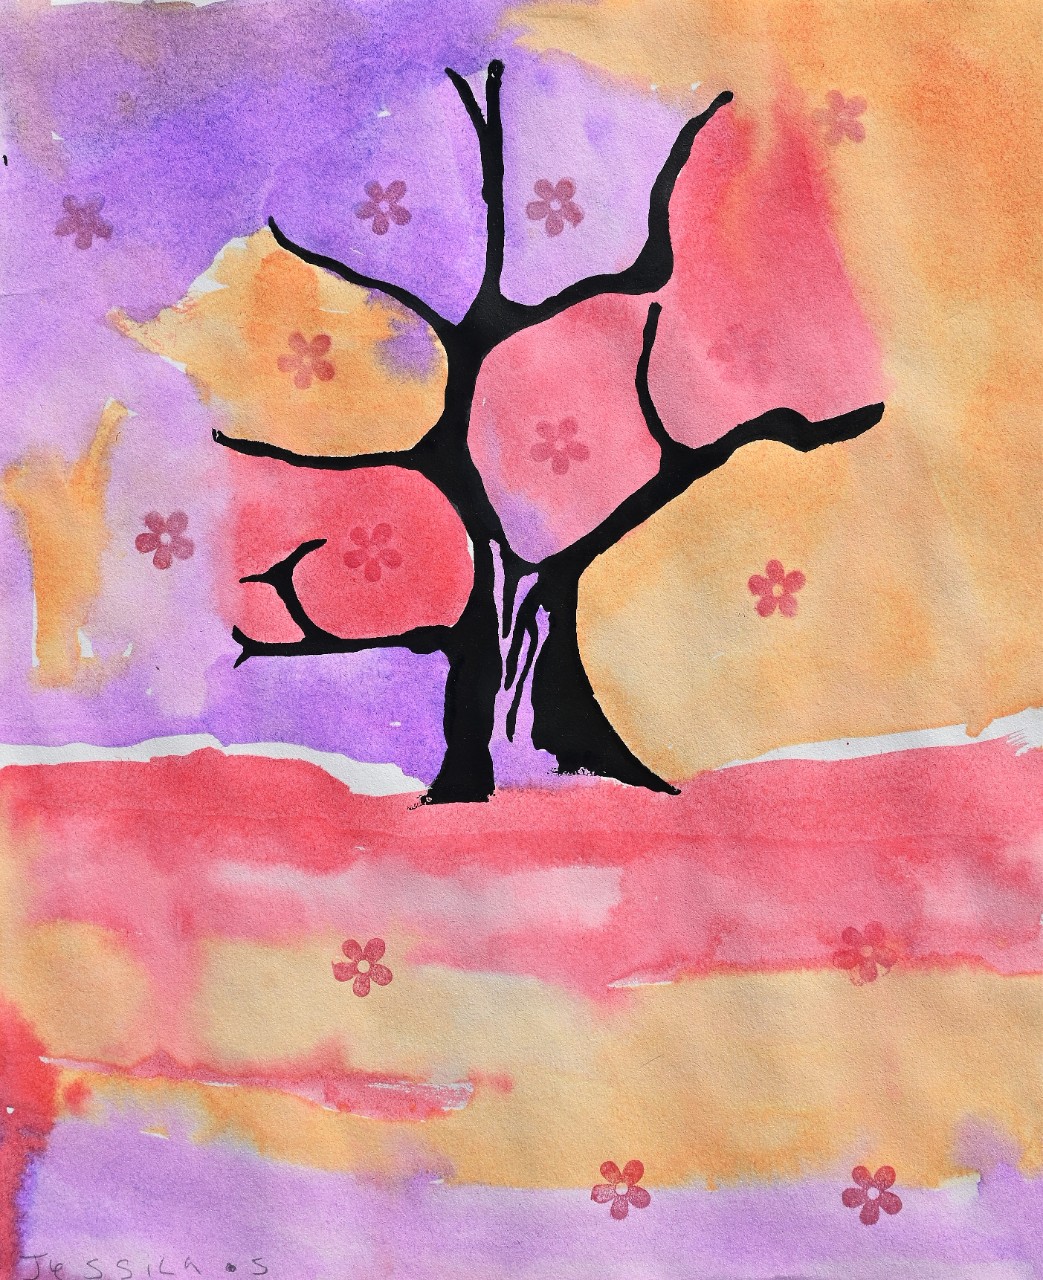 a drawing of a black tree bare of leaves, with the rest of the paper painted in soft watercolors of purple, pink and orange. Little pink roses are falling all around the tree and onto the ground.